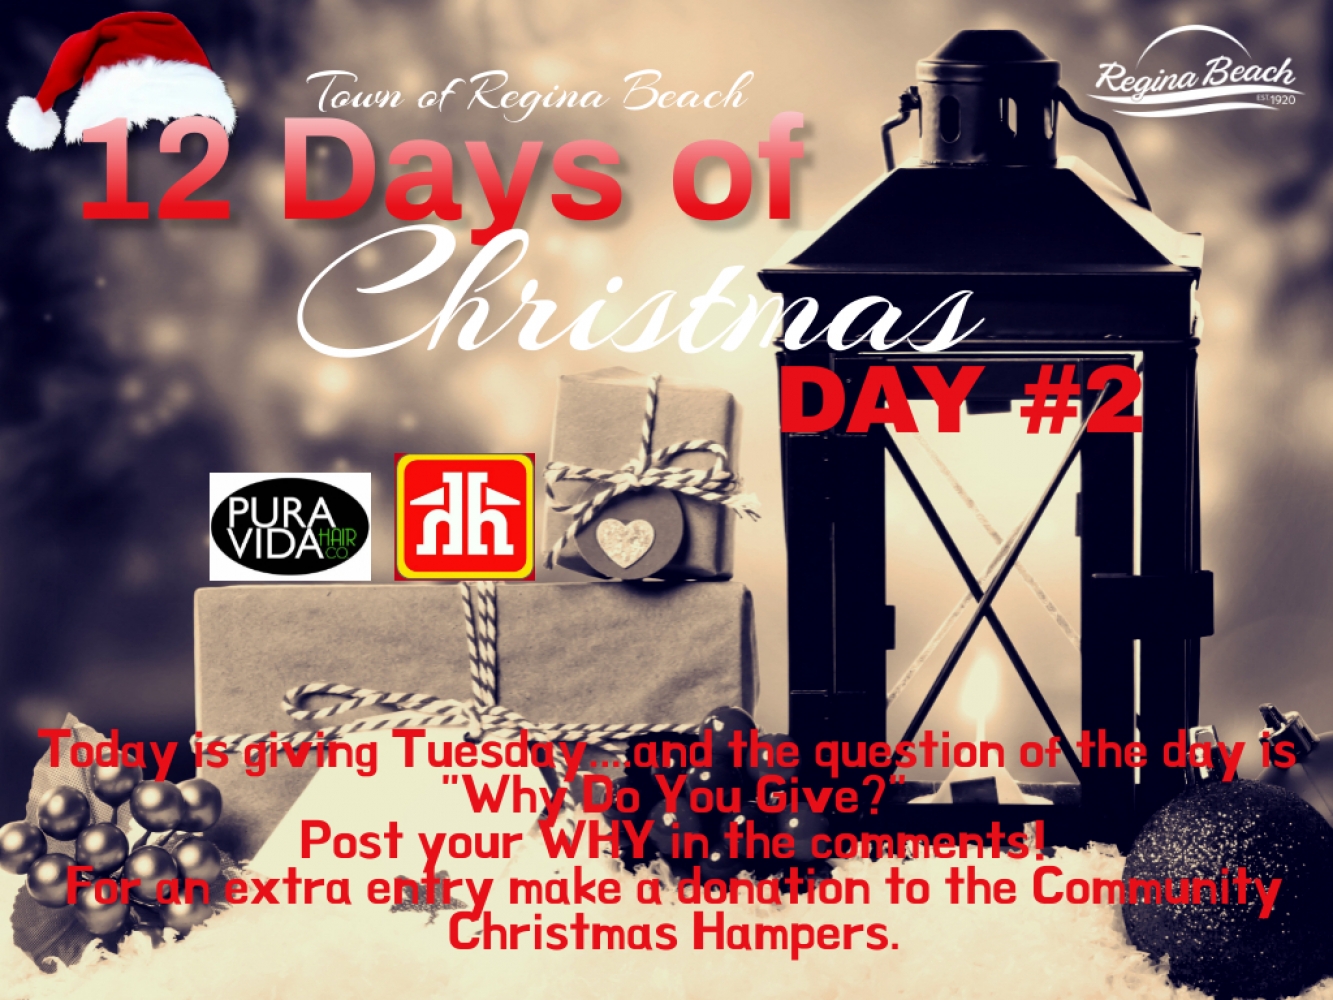 Day #2 of Our 12 Days of Christmas